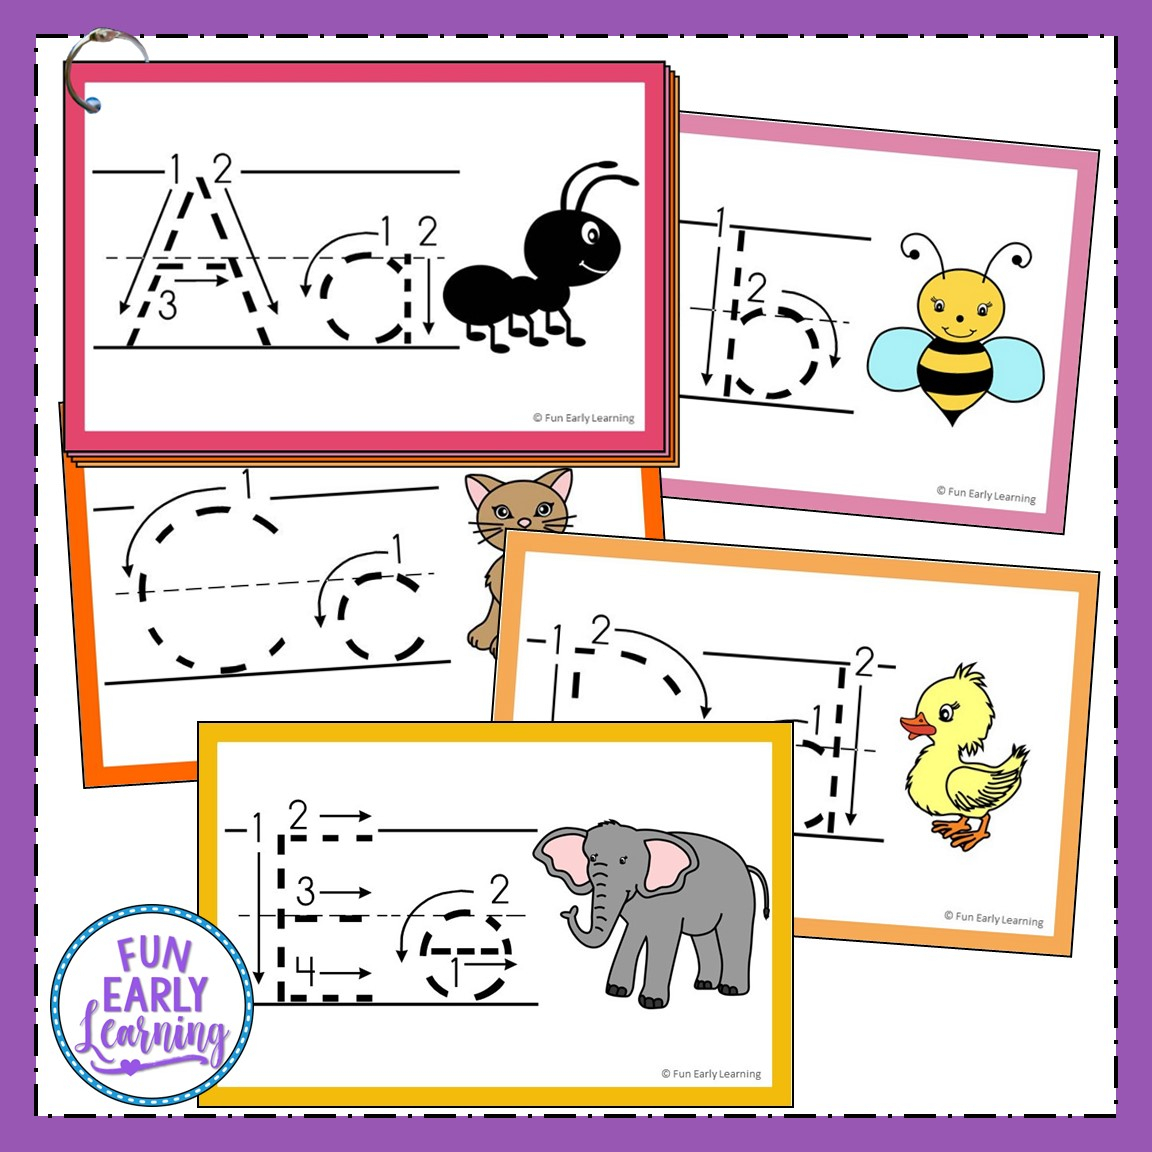 Teach Letters And Writing With Our Free Alphabet Animal pertaining to Alphabet Tracing Cards